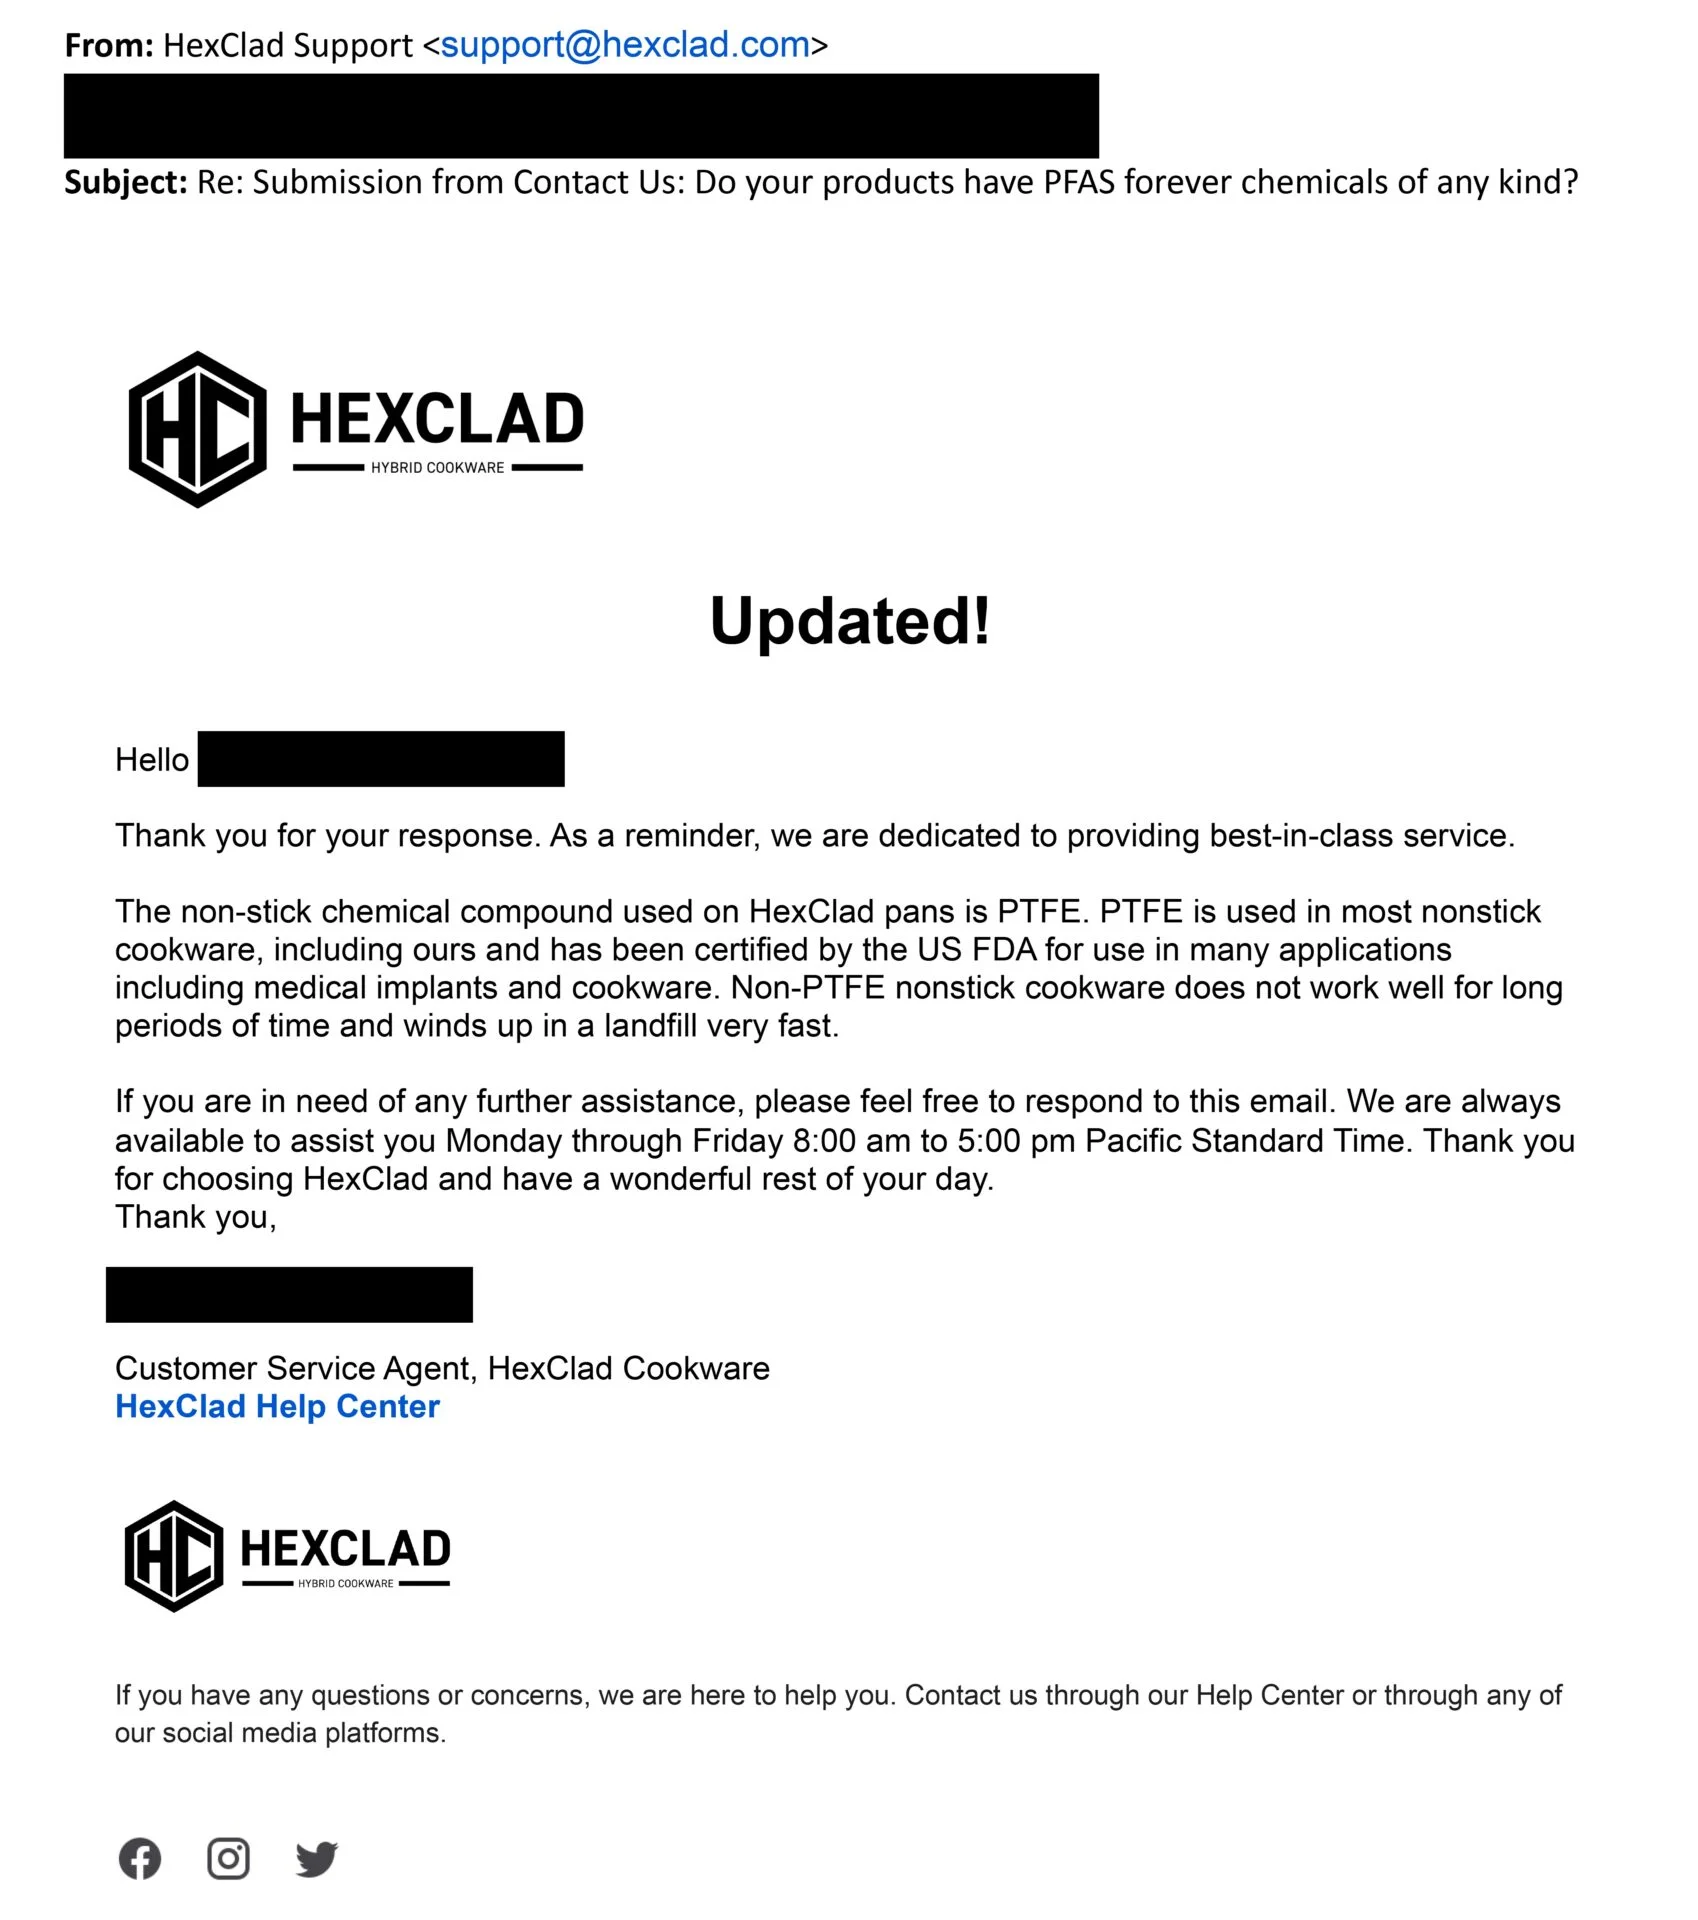 HexClad admitting they have PTFE coatings, which are PFAS chemicals